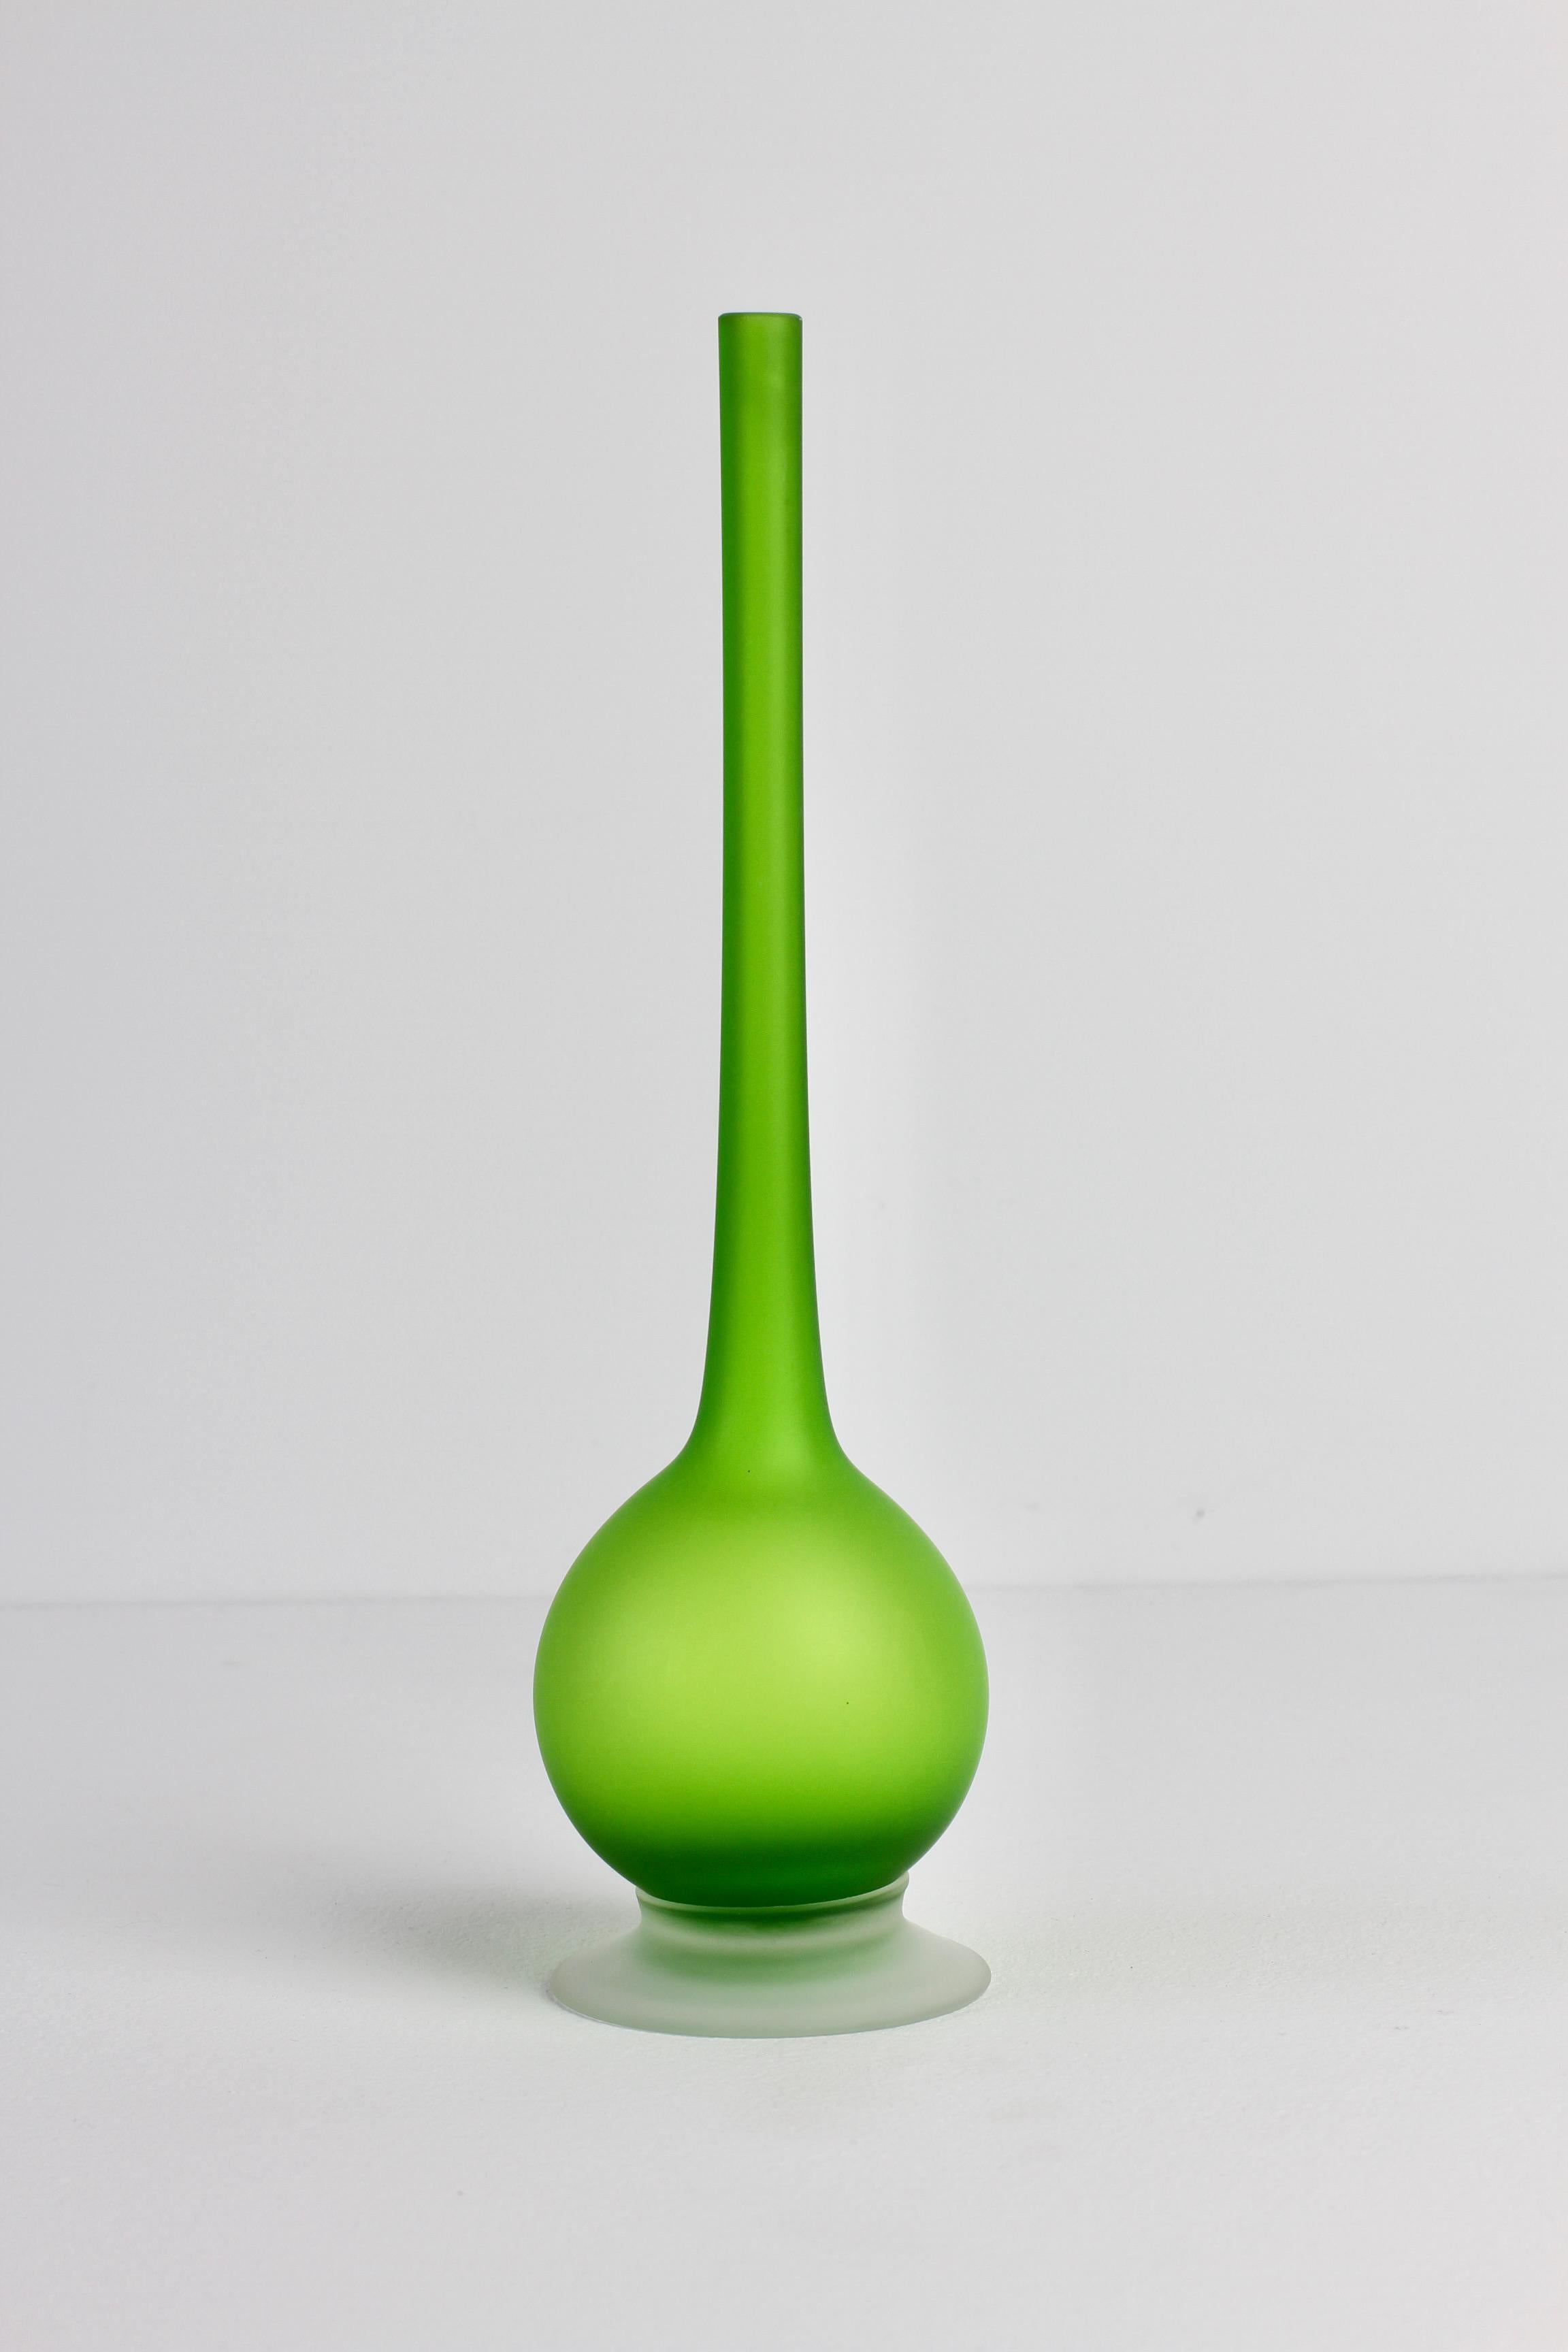 Mid-Century Modern vibrant jellybean green colored / coloured satin Murano glass pencil neck vases by Carlo Moretti (1934-2008), circa 1970.

An absolutely bold yet elegant design with the use of bright, vivid green combined with the bulbous shape